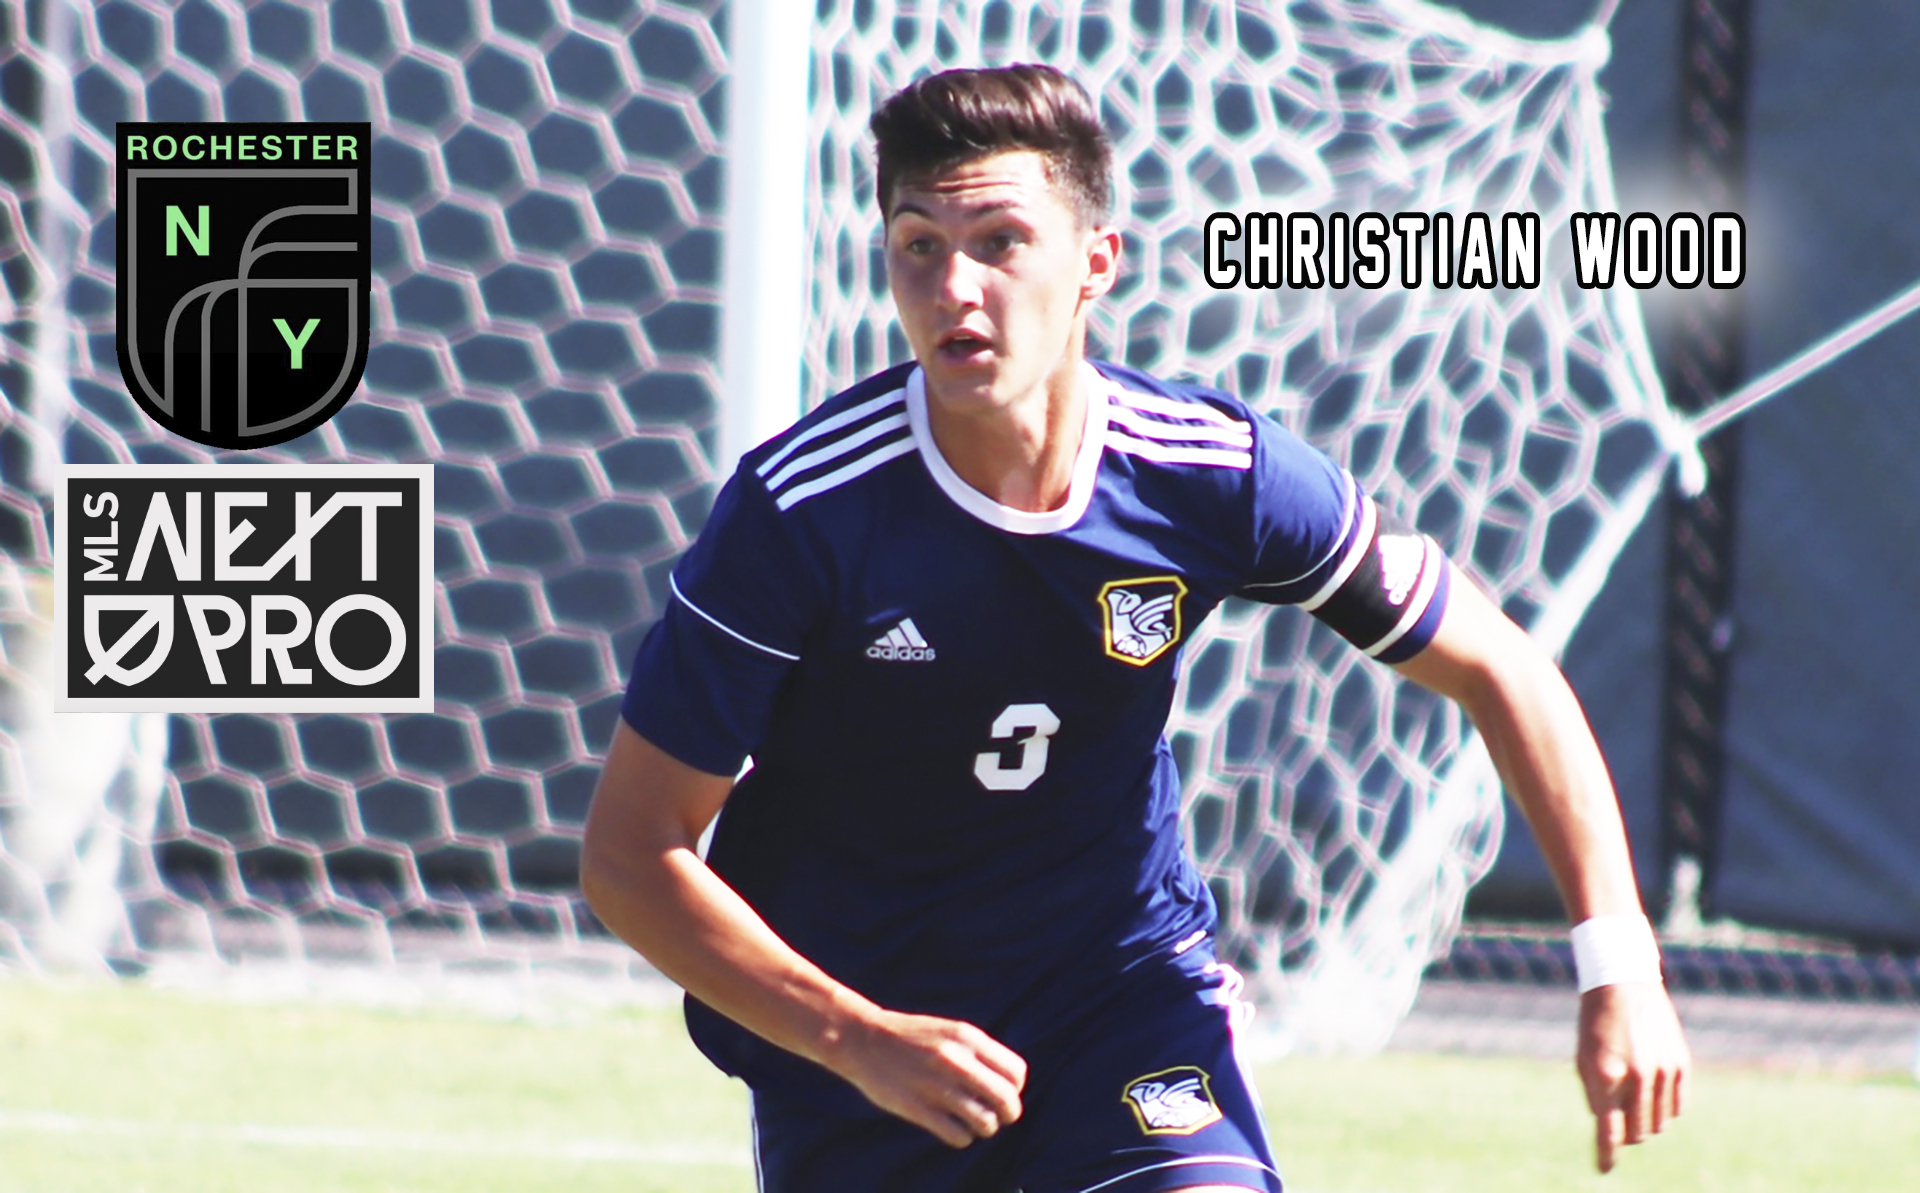 Christian signs a pro contract with Rochester New York FC.